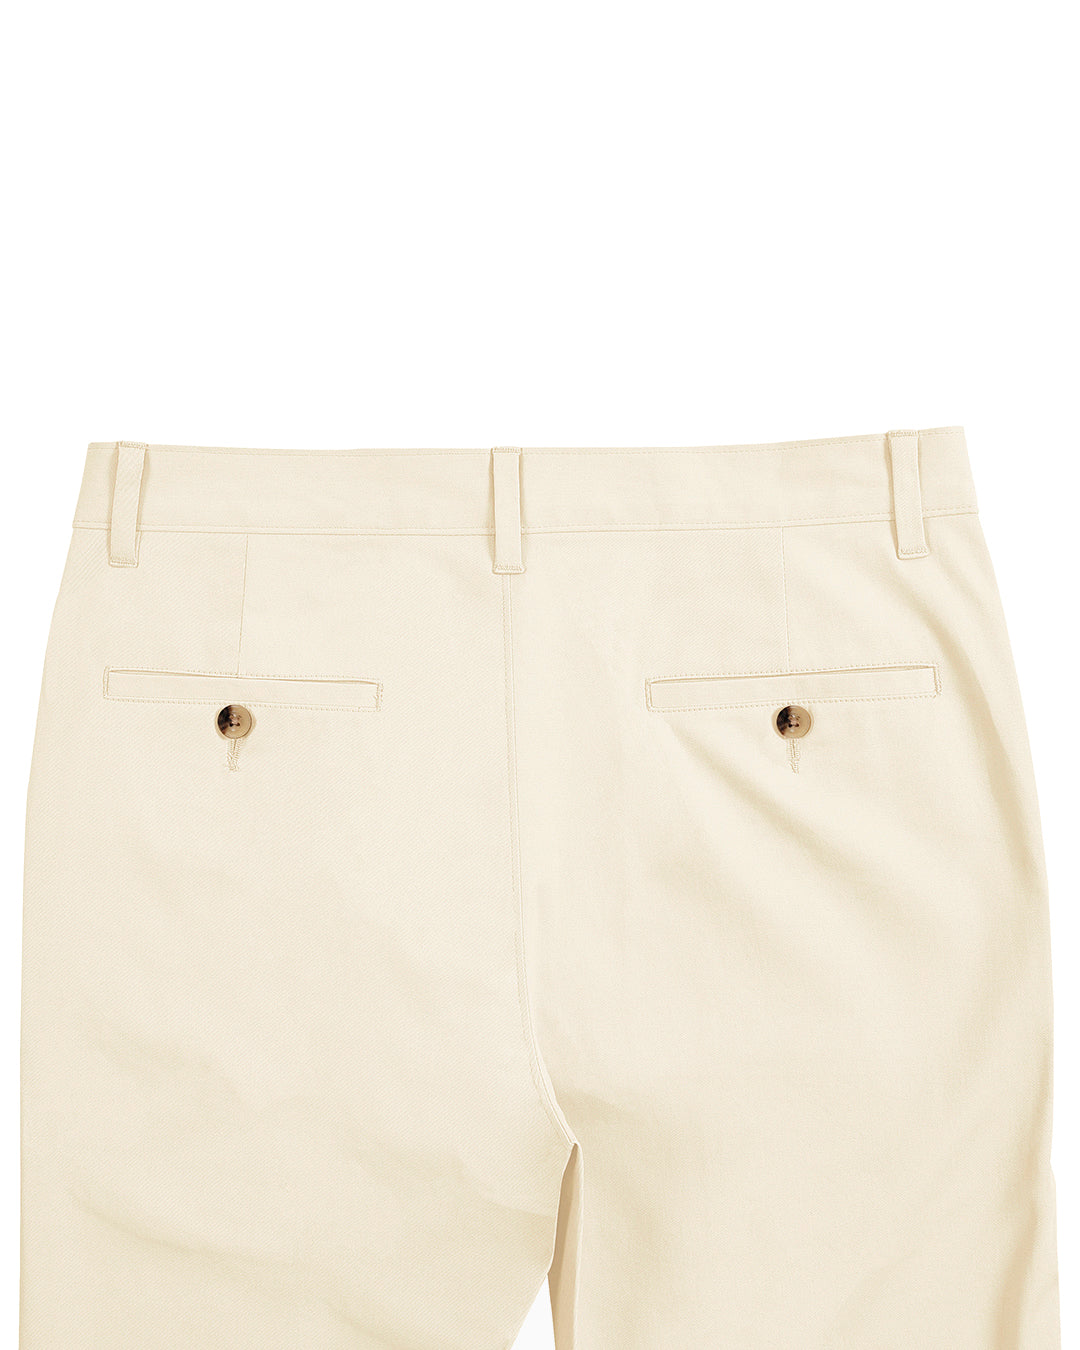 Back view of custom Genoa Chino pants for men by Luxire in ivory cream